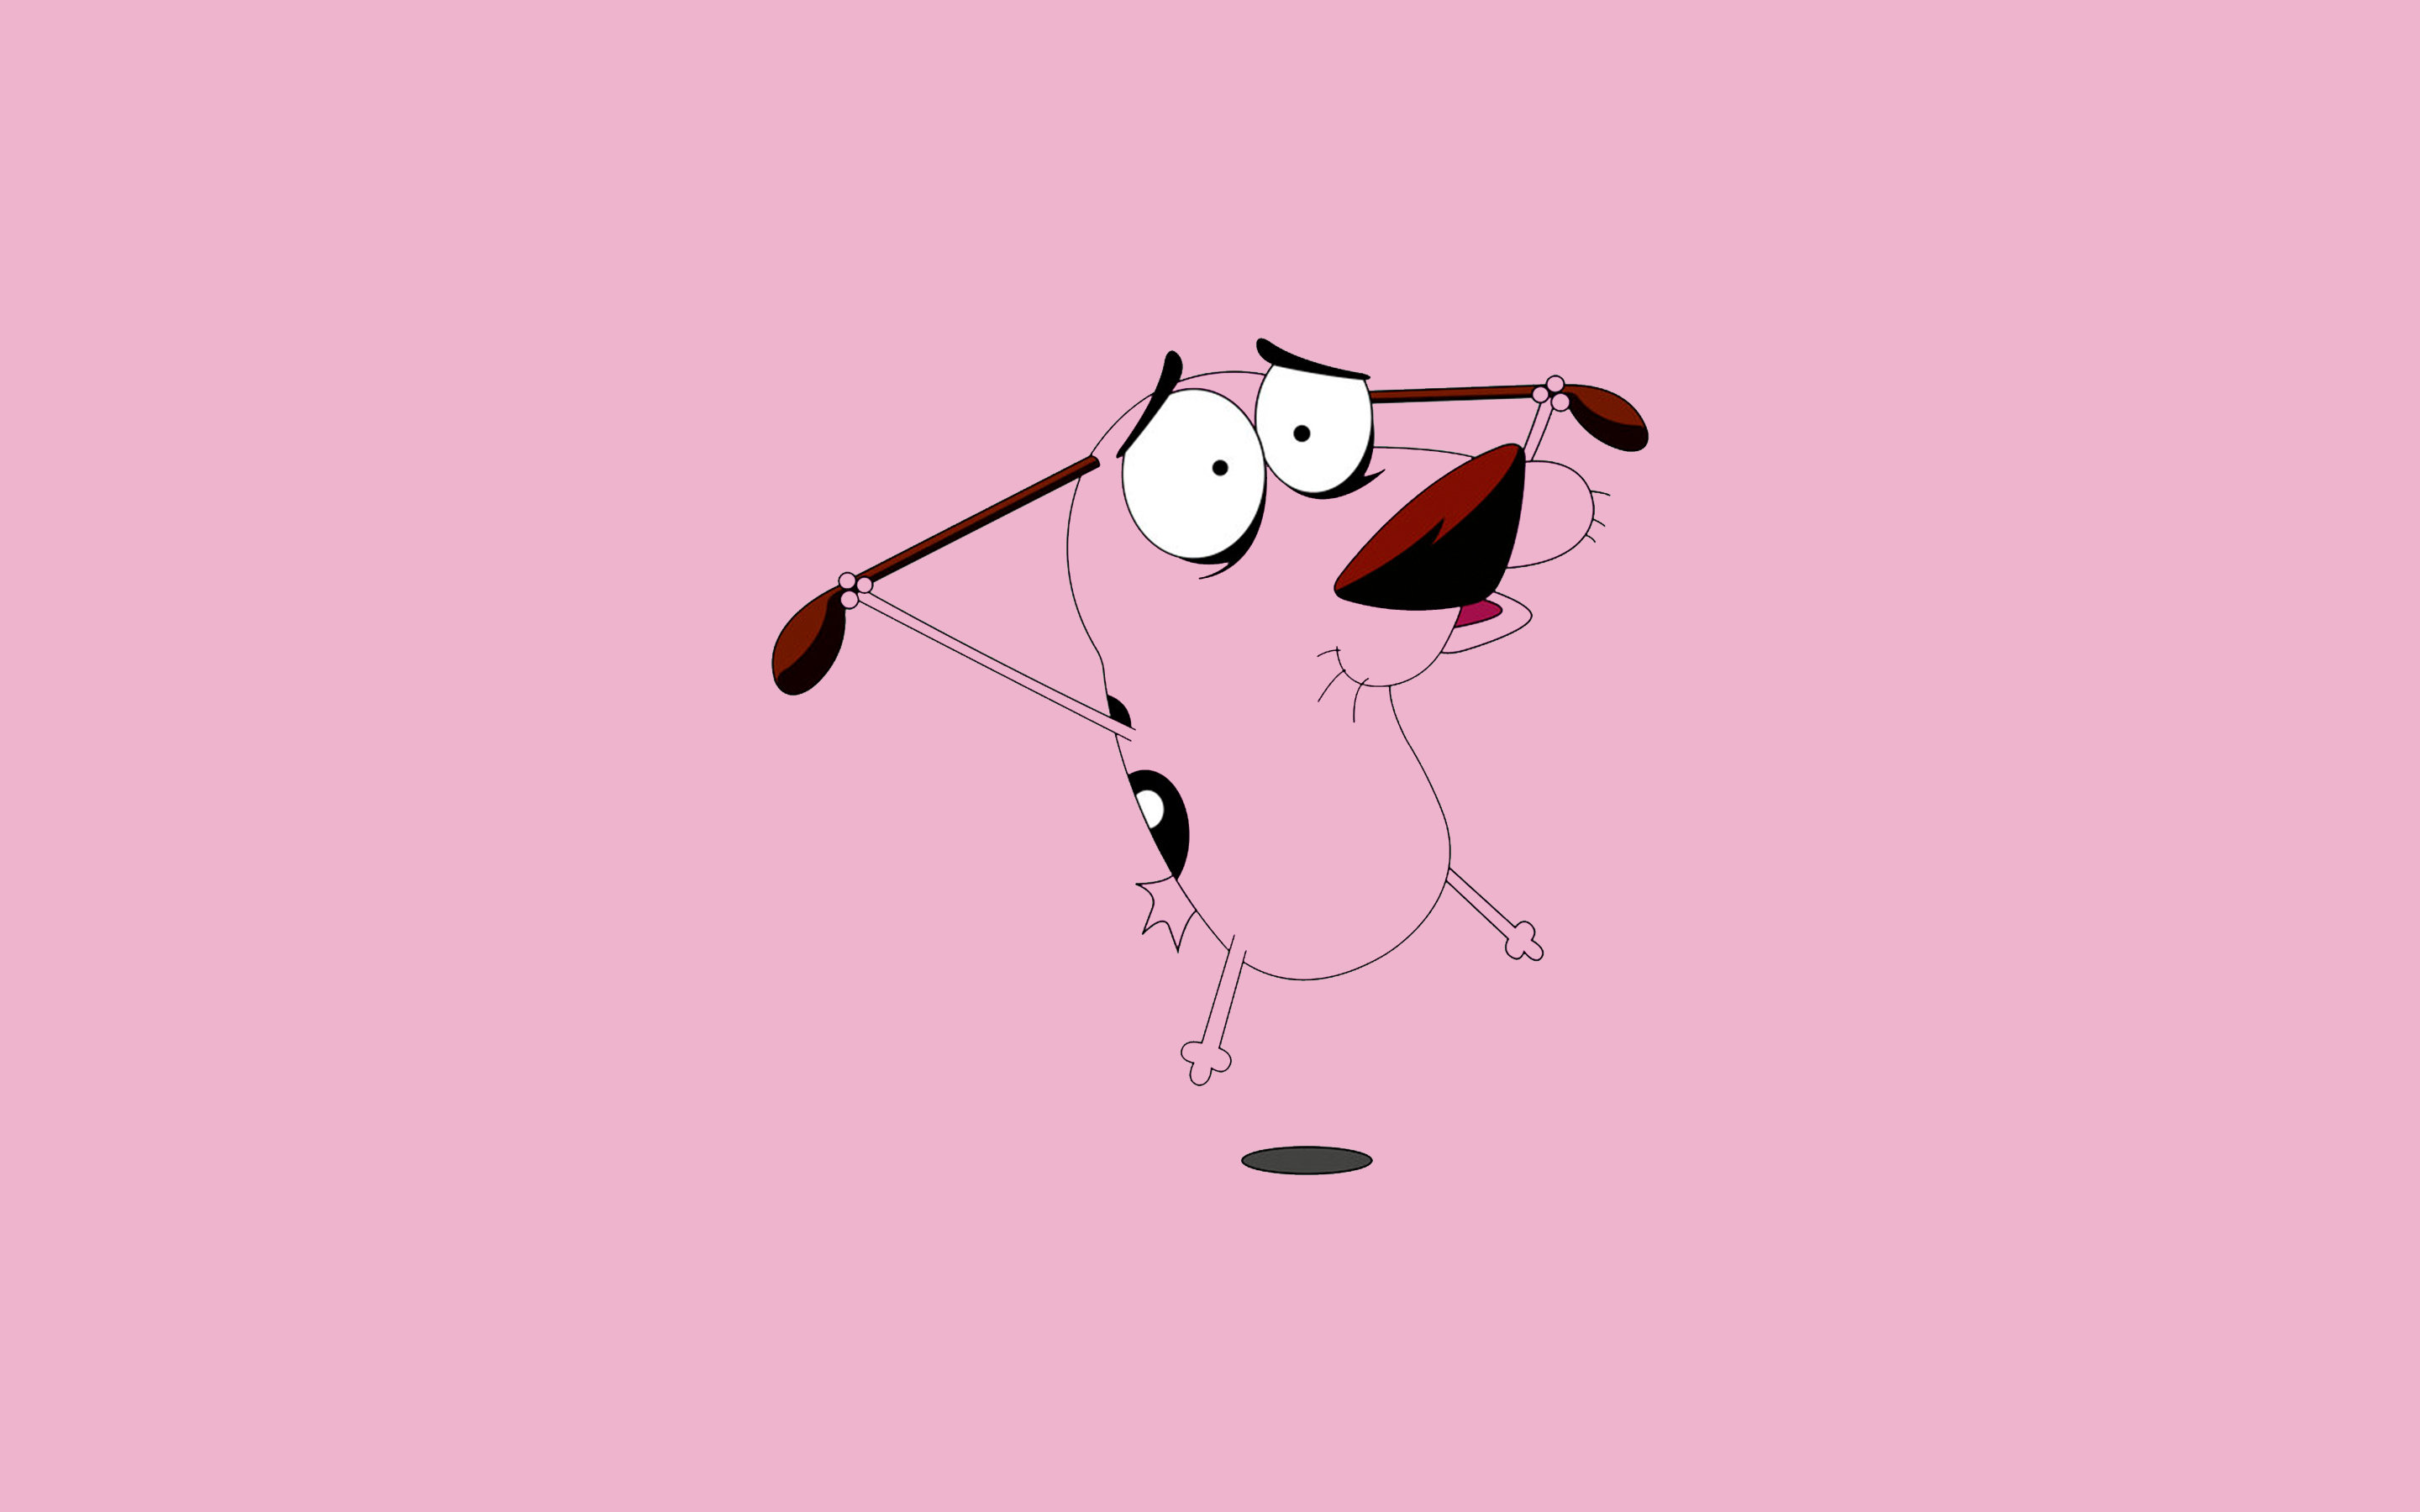 Courage The Cowardly Dog wallpaper HD for desktop background